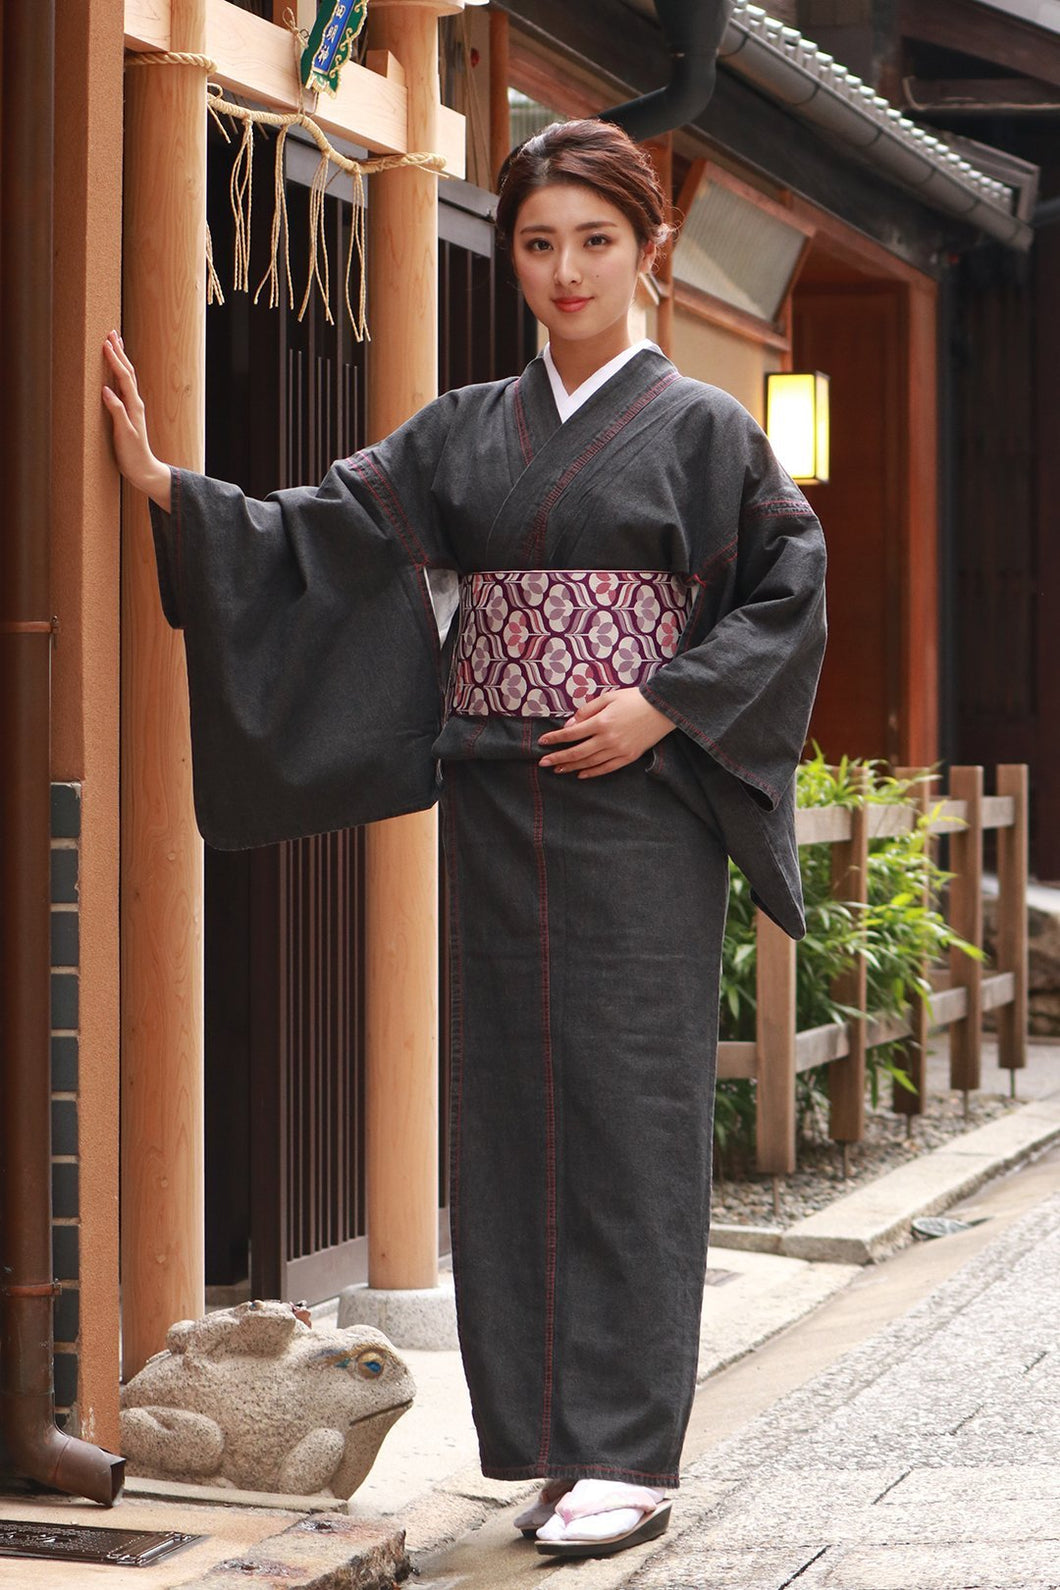 Women's Unlined Denim Kimono Black with Red Stitches: Japanese Traditional Clothes